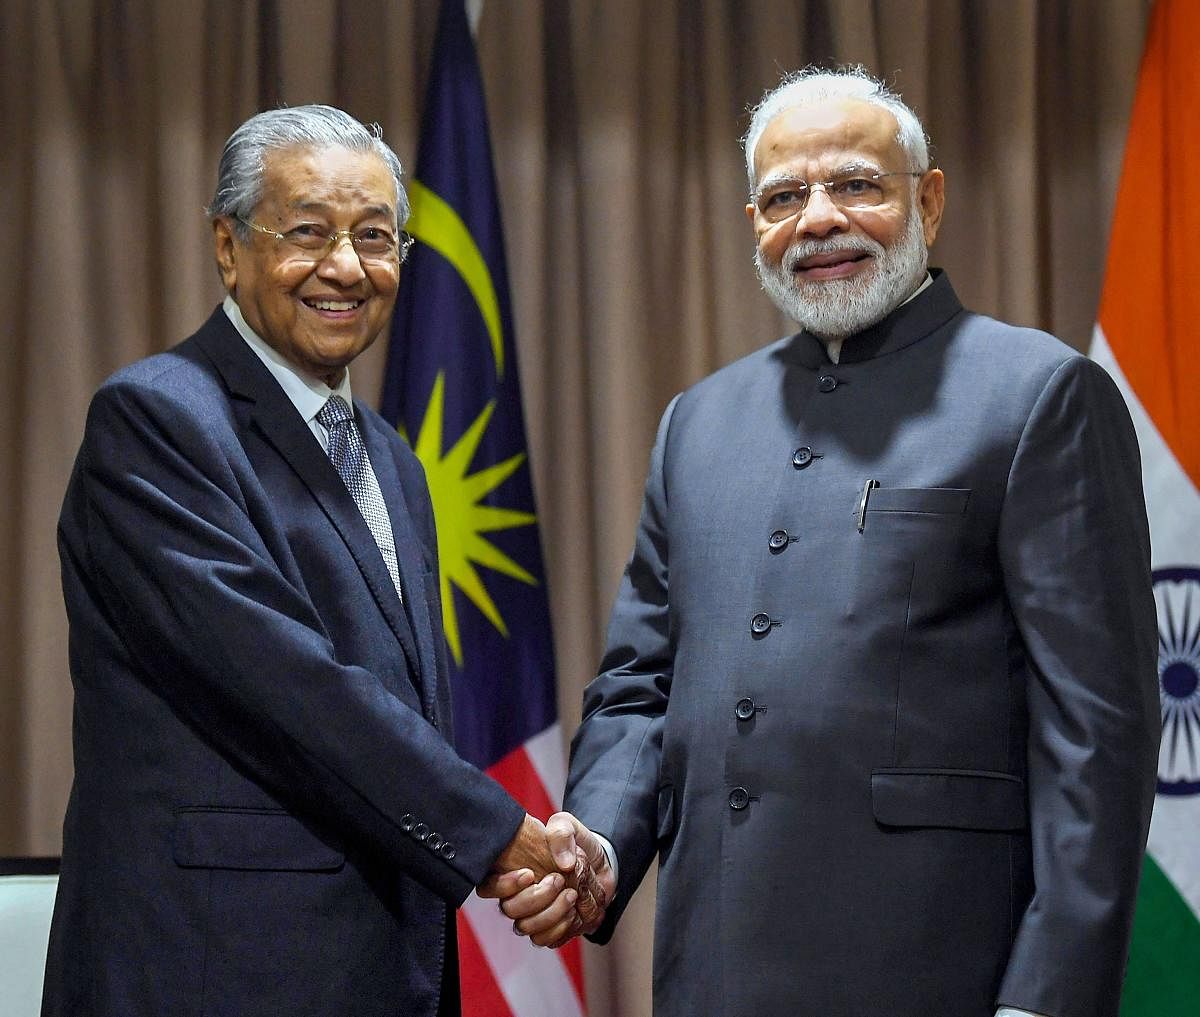 Prime Minister Narendra Modi shakes hands with his Malaysian counterpart Mahathir Mohamad, on the sidelines of 5th Eastern Economic Forum, at Vladivostok, in Russia, on September 5, 2019. PIB/PTI